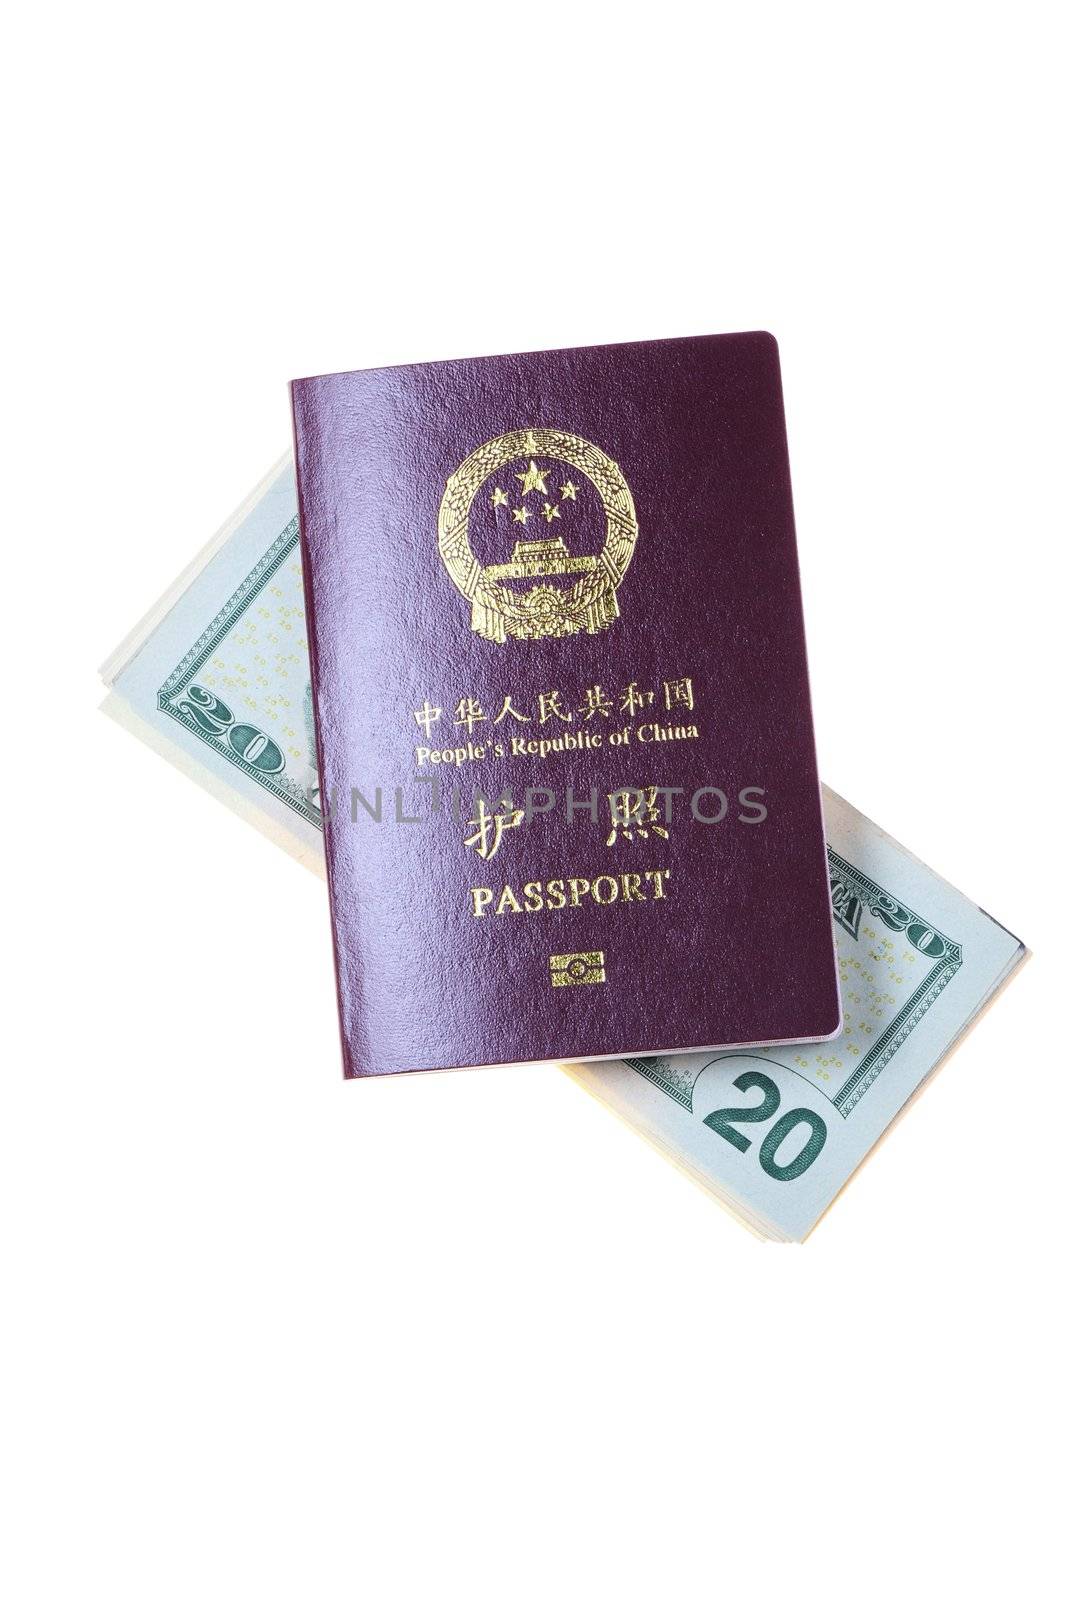 Chinese passport and a pile of US Dollars isolated on white